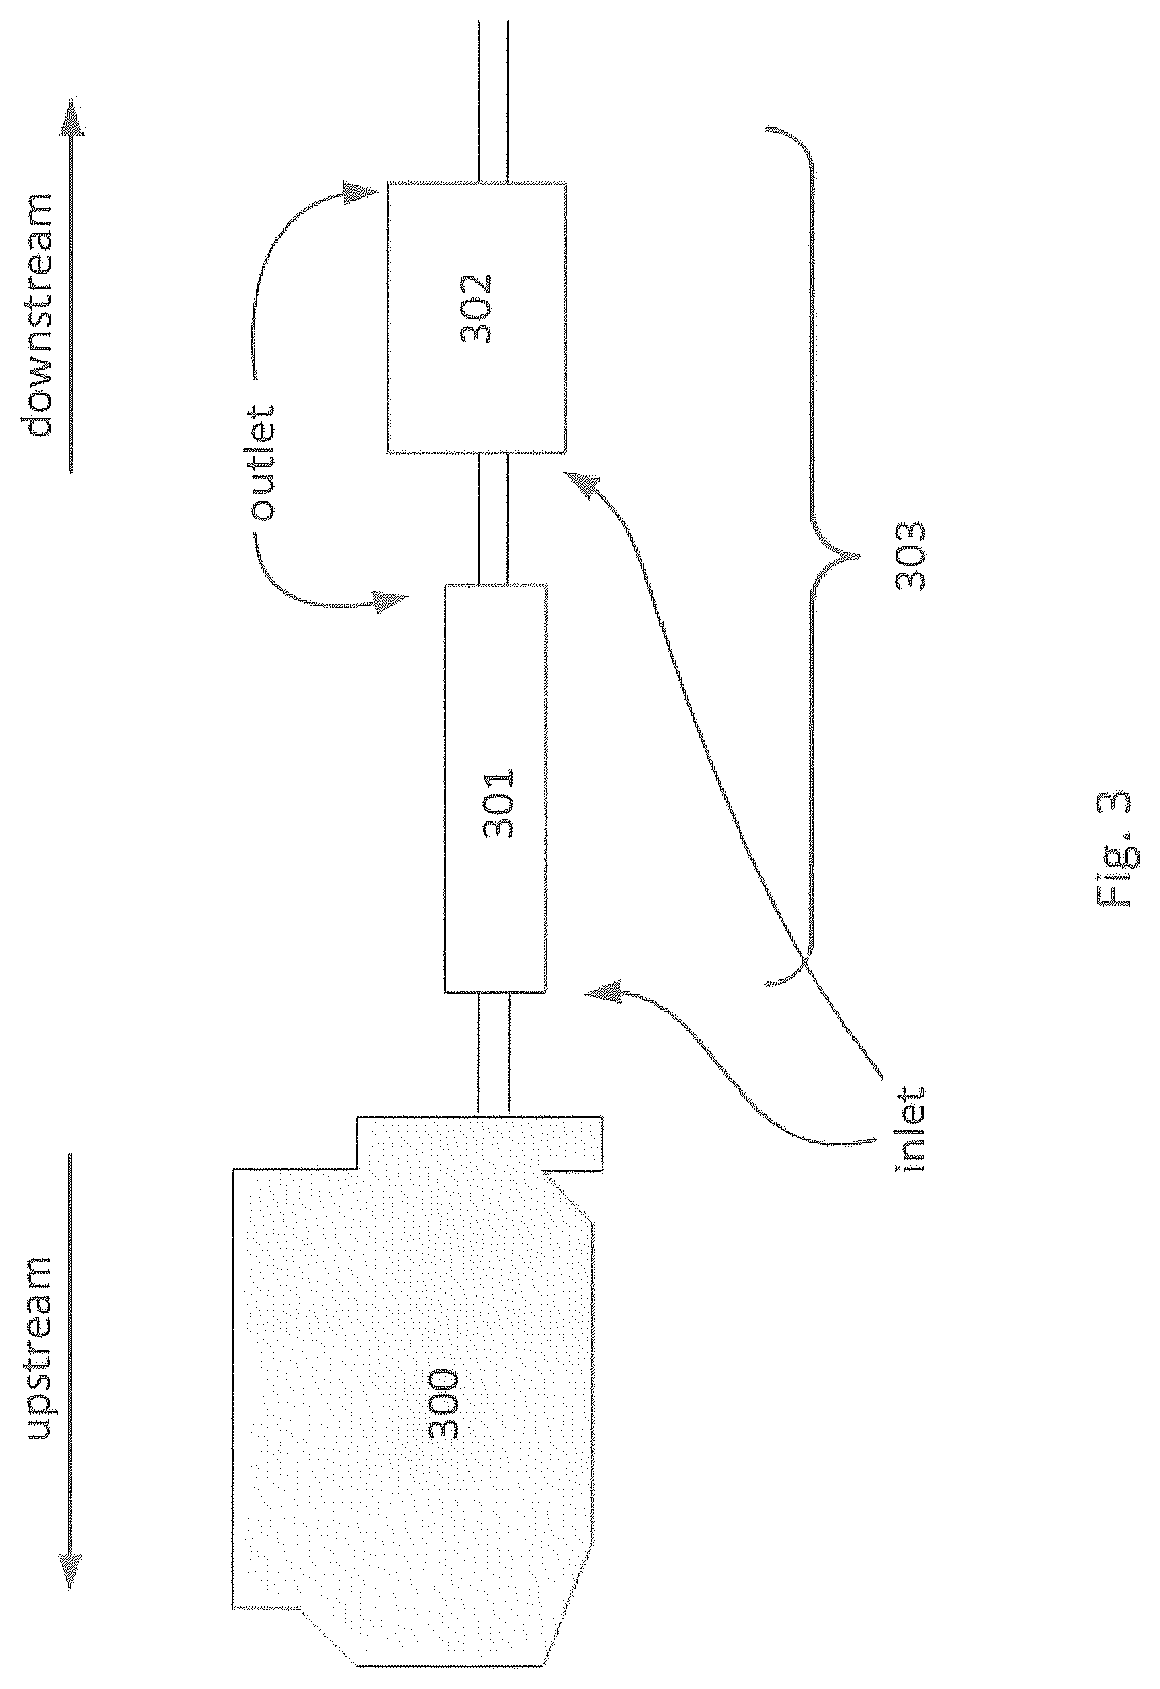 Hydrogen-assisted integrated emission control system